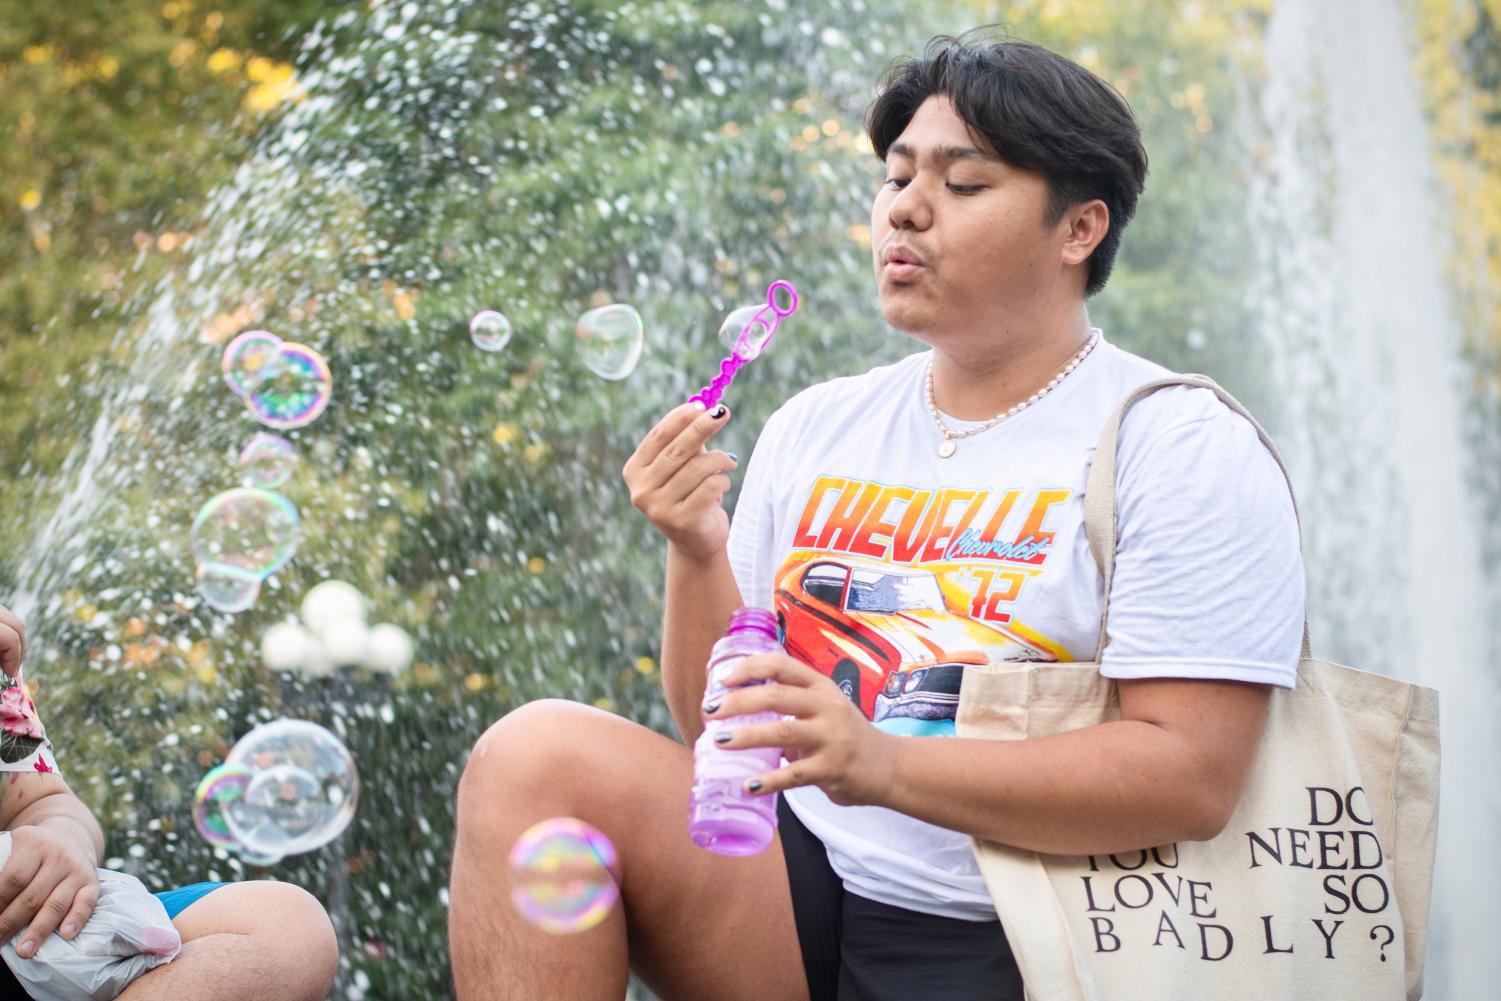 A man wearing a white shirt with an orange car cartoon, black shorts and a tote bag. He is holding a pink bottle of bubbles with one hand and blowing bubbles with his other hand. Behind him is water from a fountain.